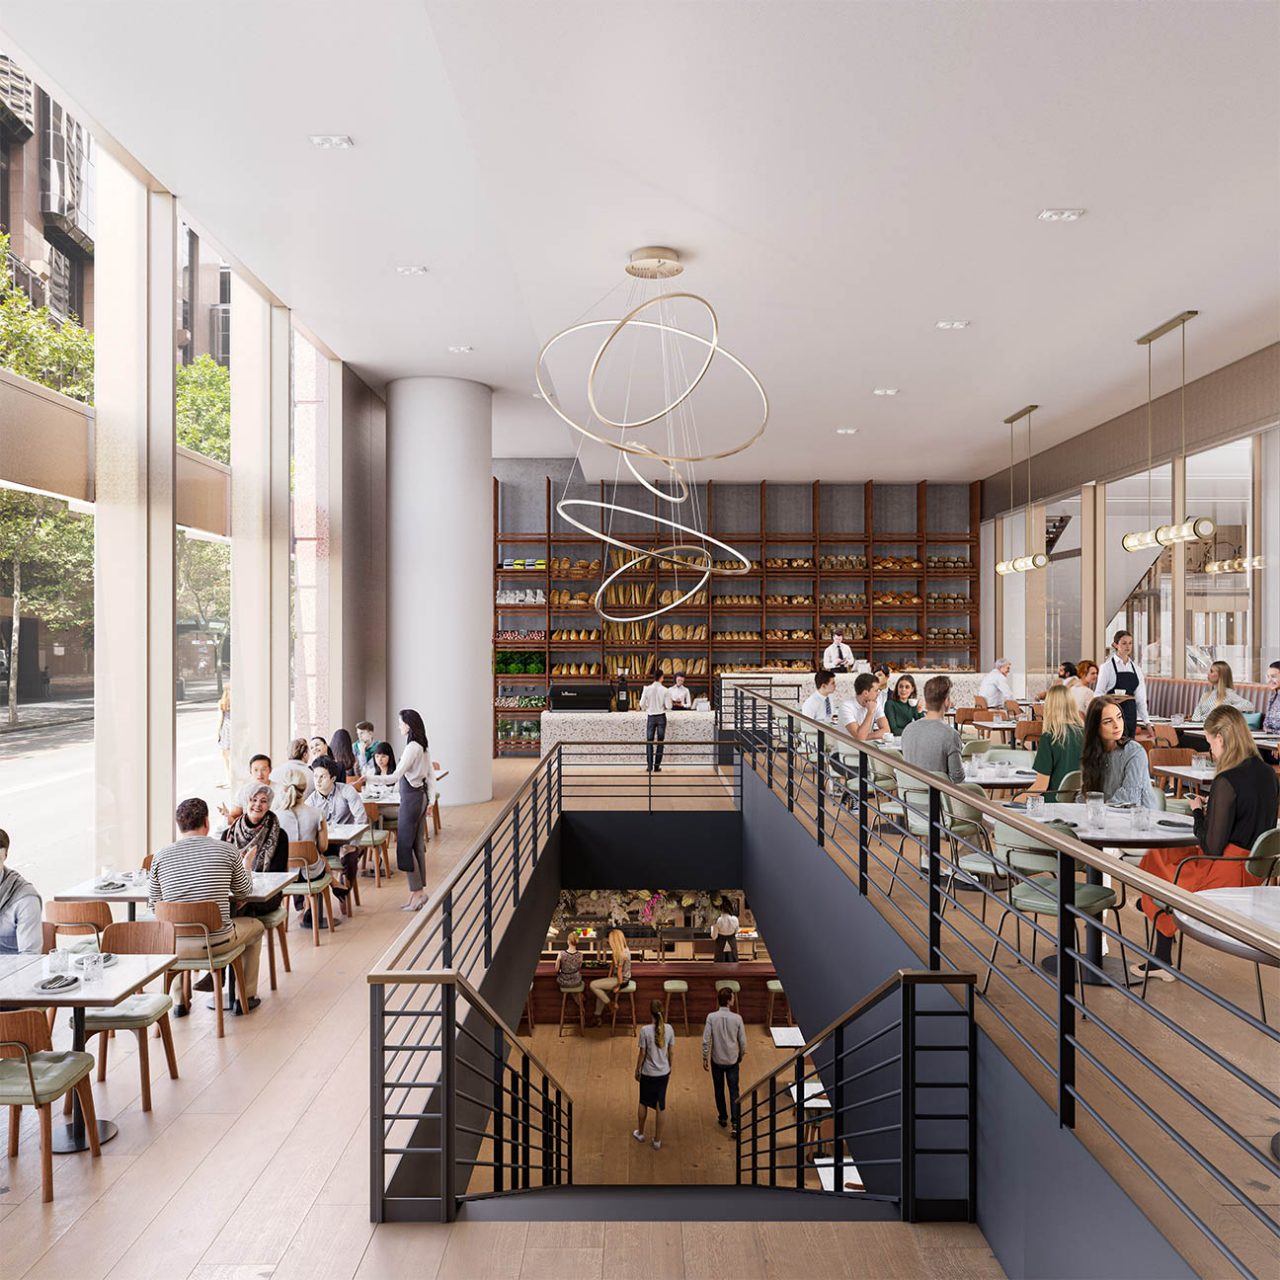 Artist's impression north tower interior retail precinct, showing dining concourse, seating areas, food and beverage locations